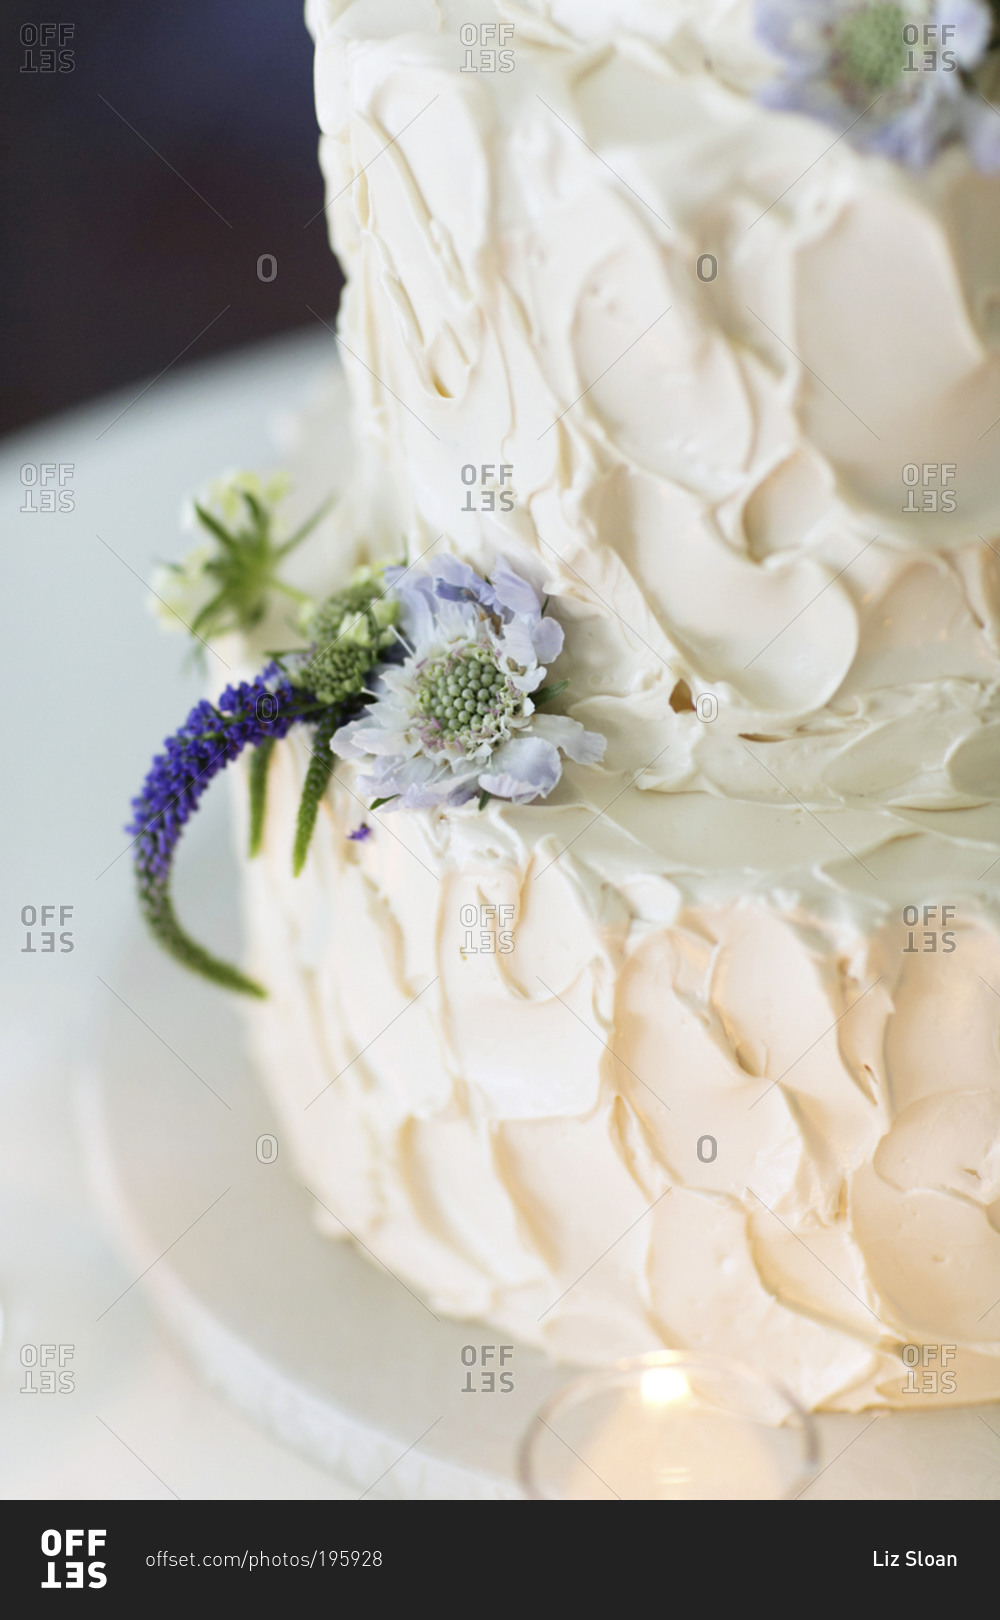 A small pale purple flower decorates a frosting covered cake